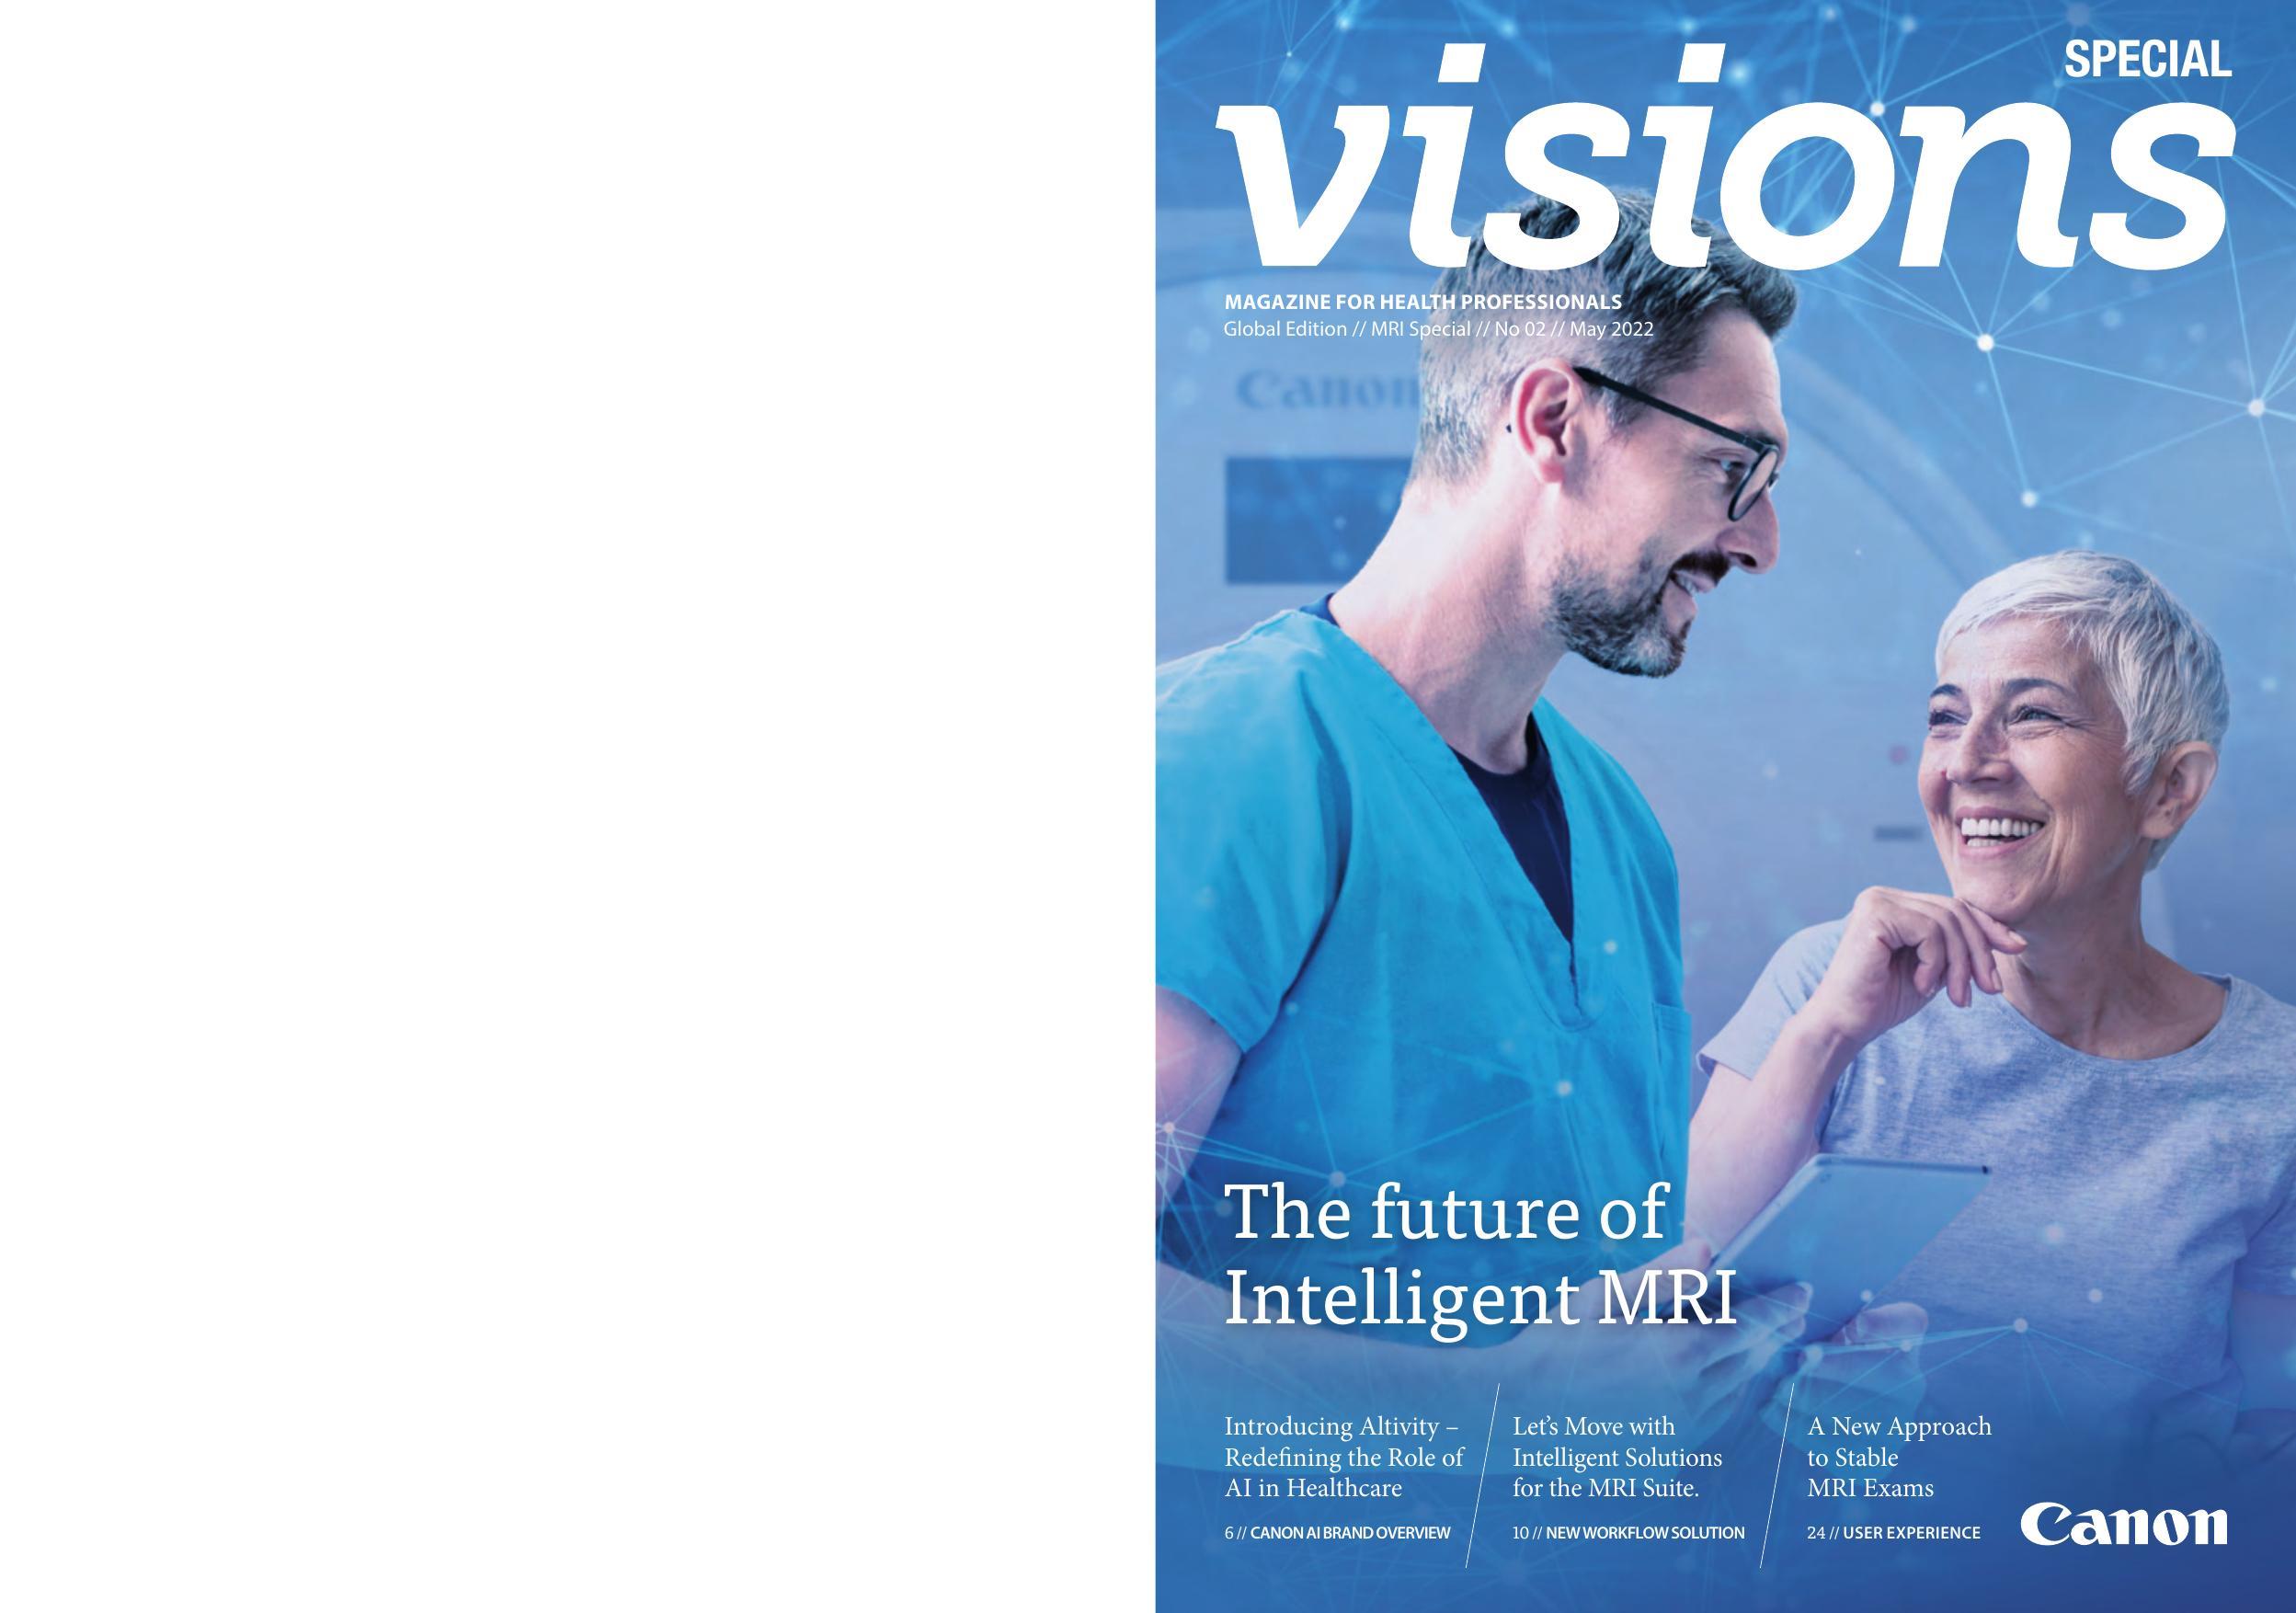 visions-special-mri-global-edition.pdf